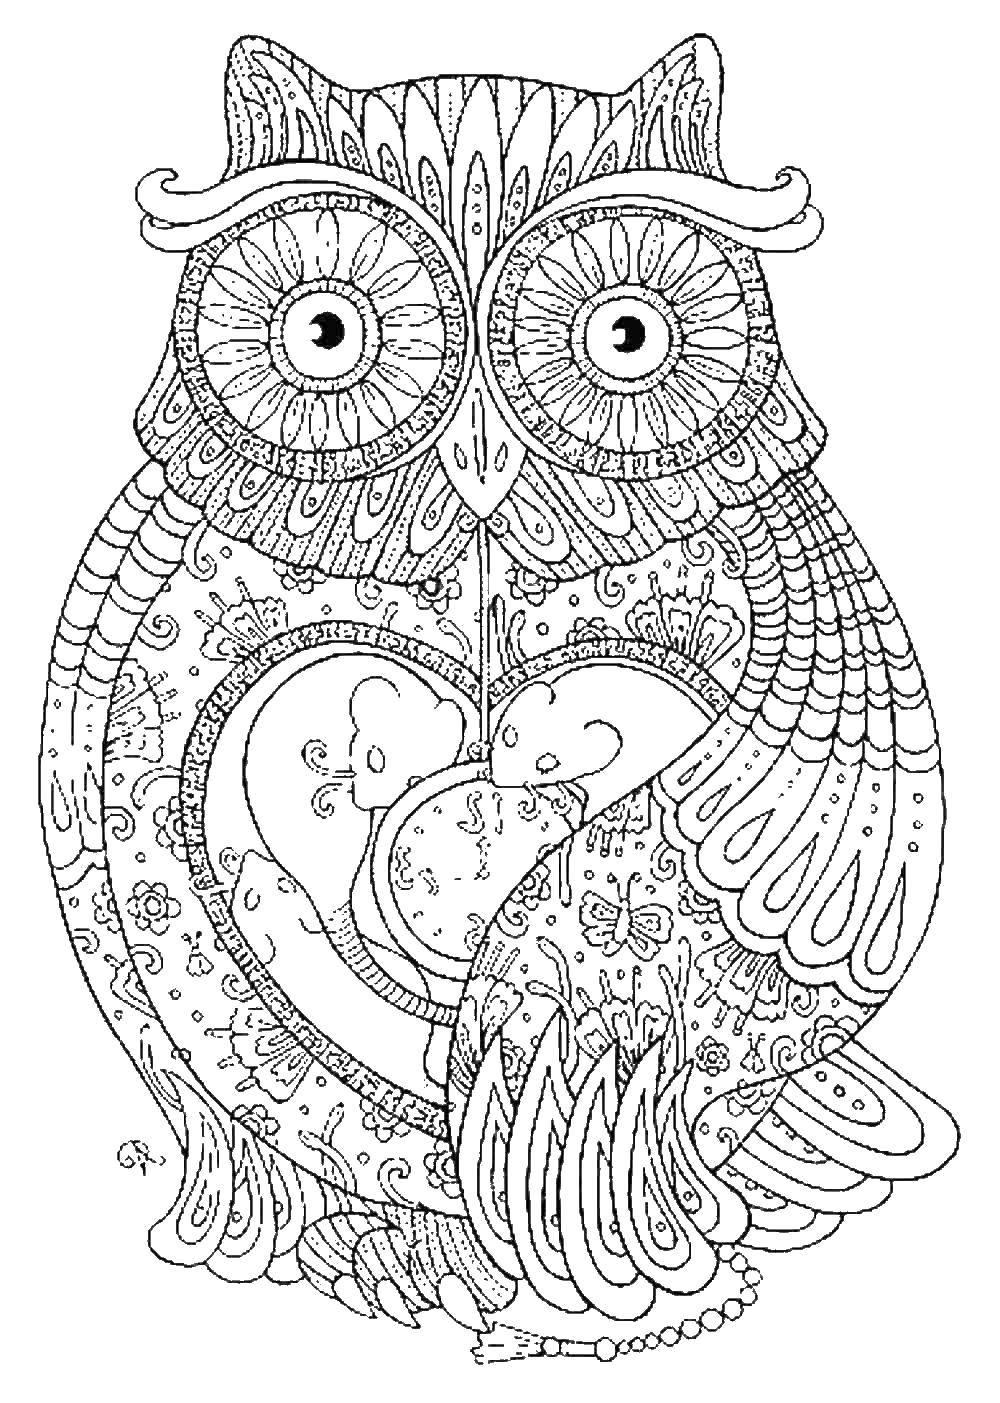 Coloring Patterned owl. Category patterns. Tags:  Patterns, animals.